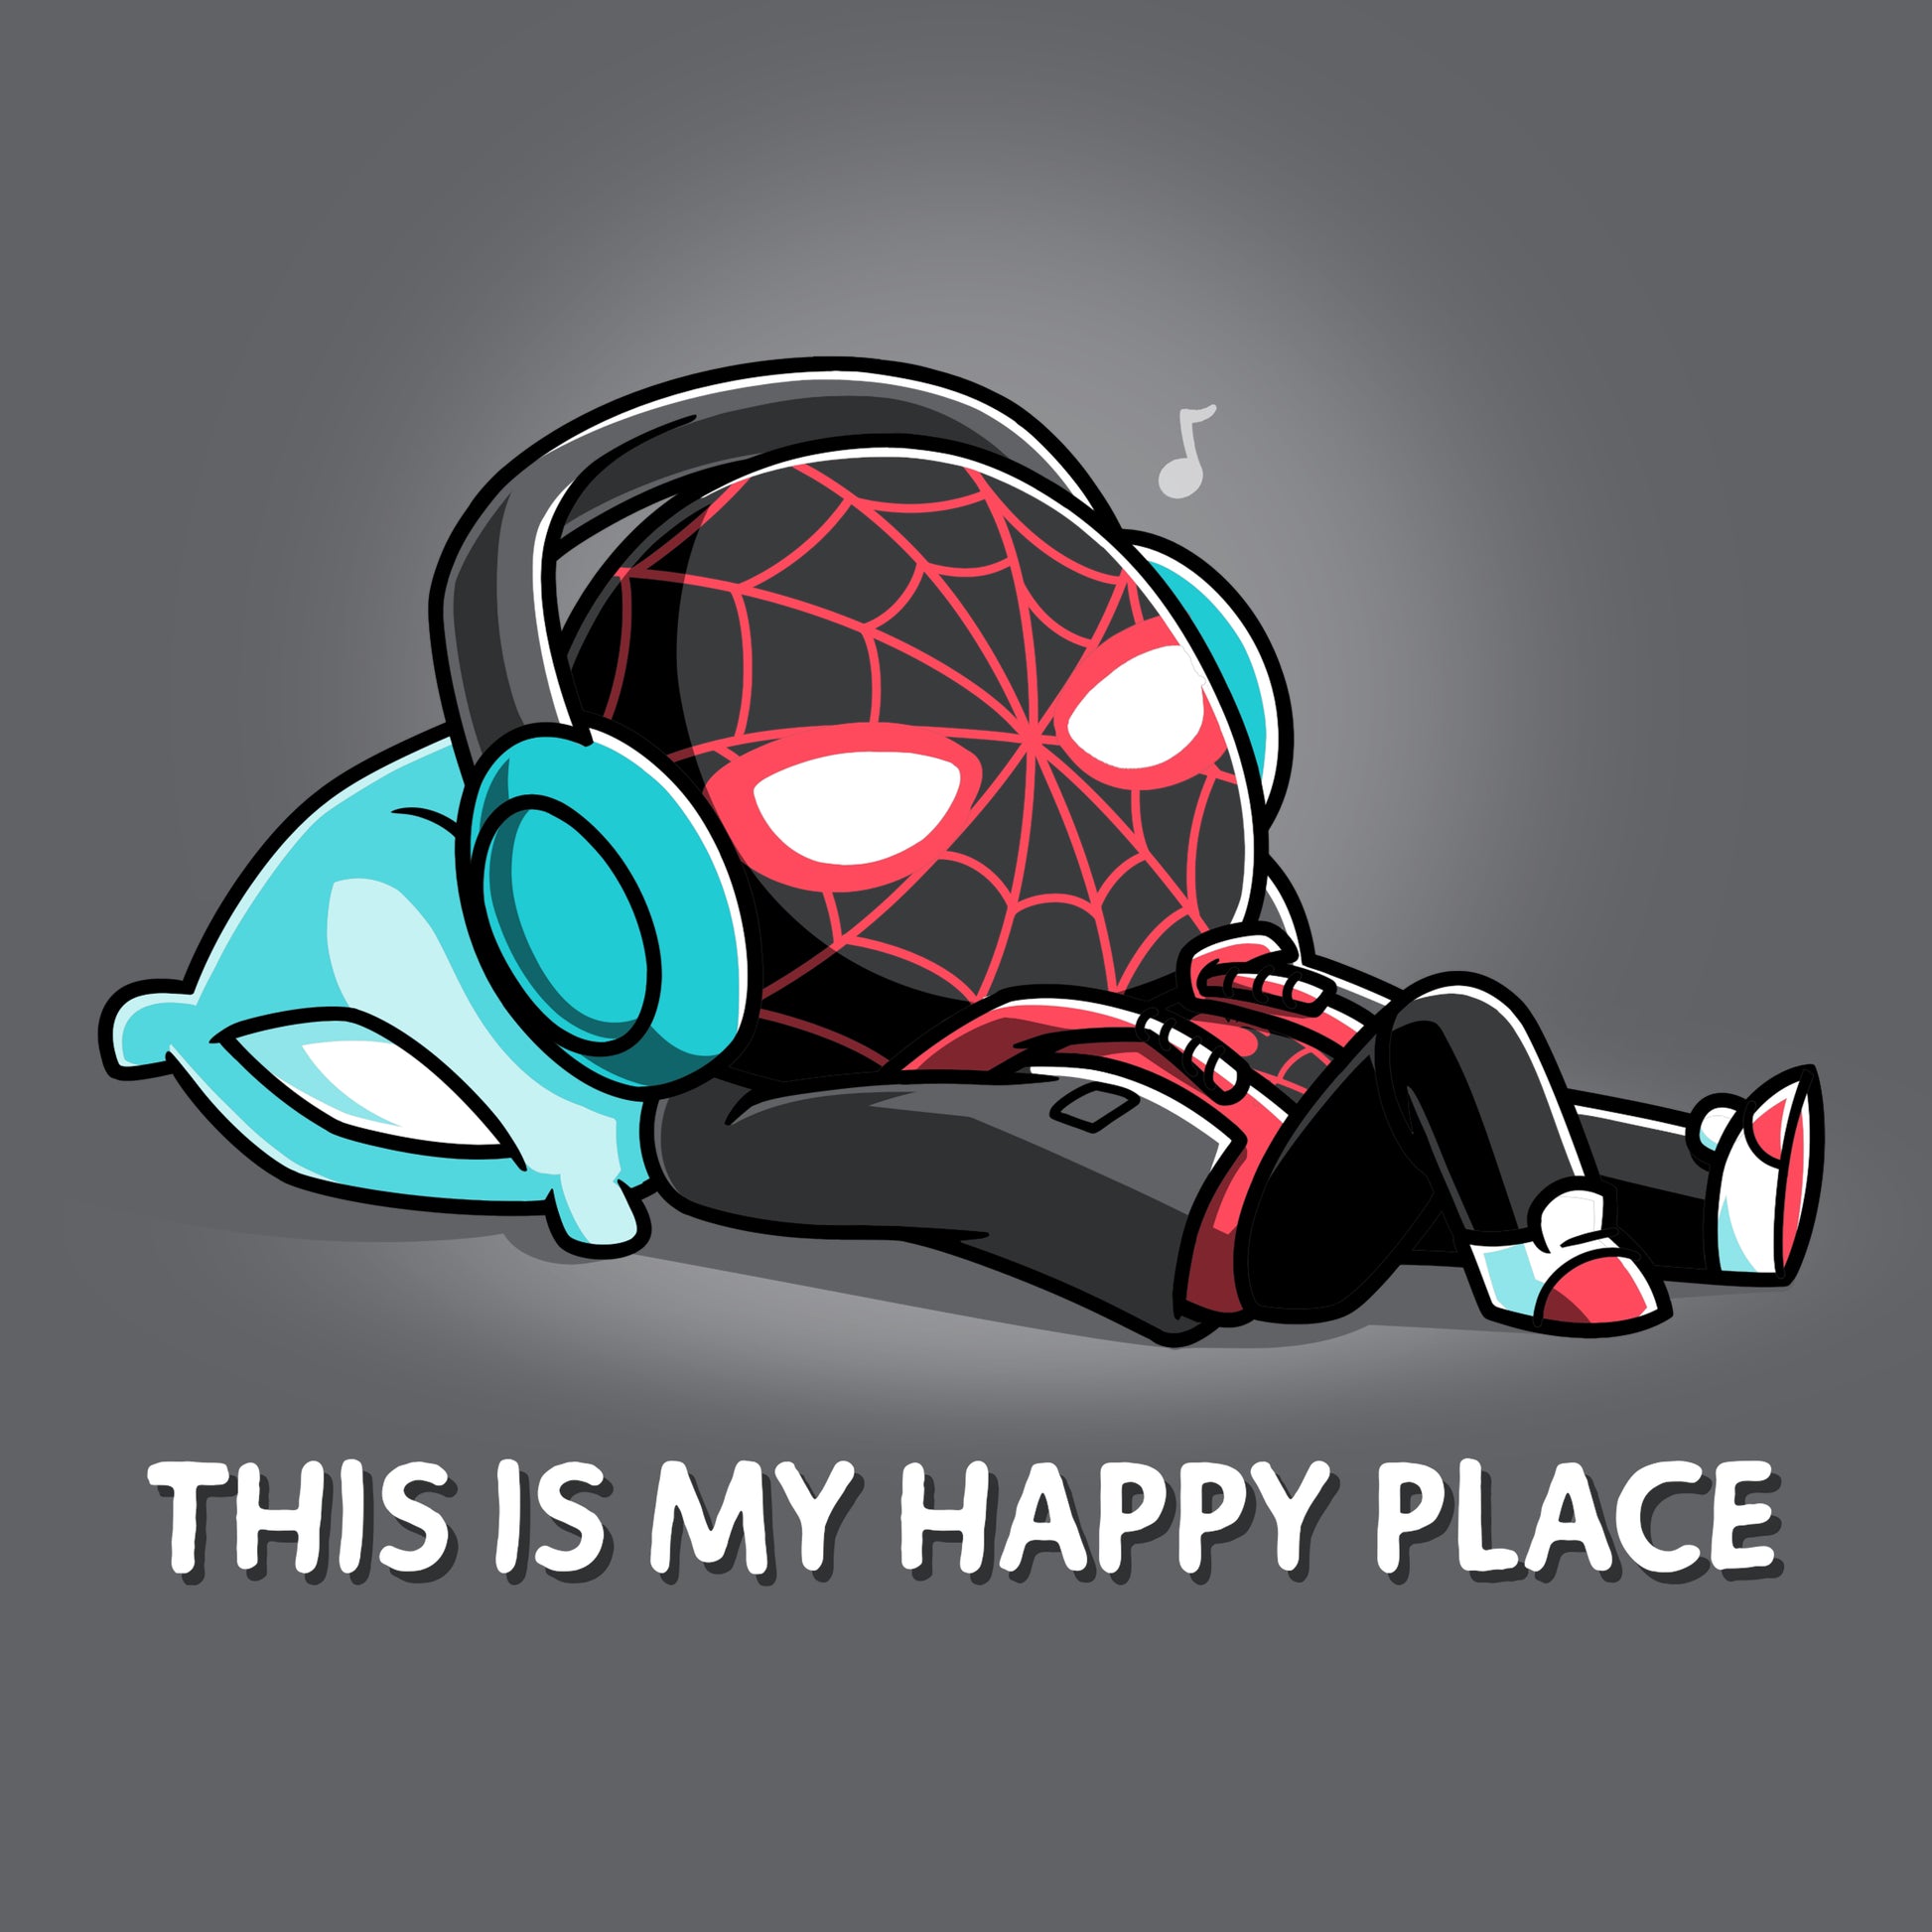 This is my happy place for Marvel licensed Miles Morales T-shirts.